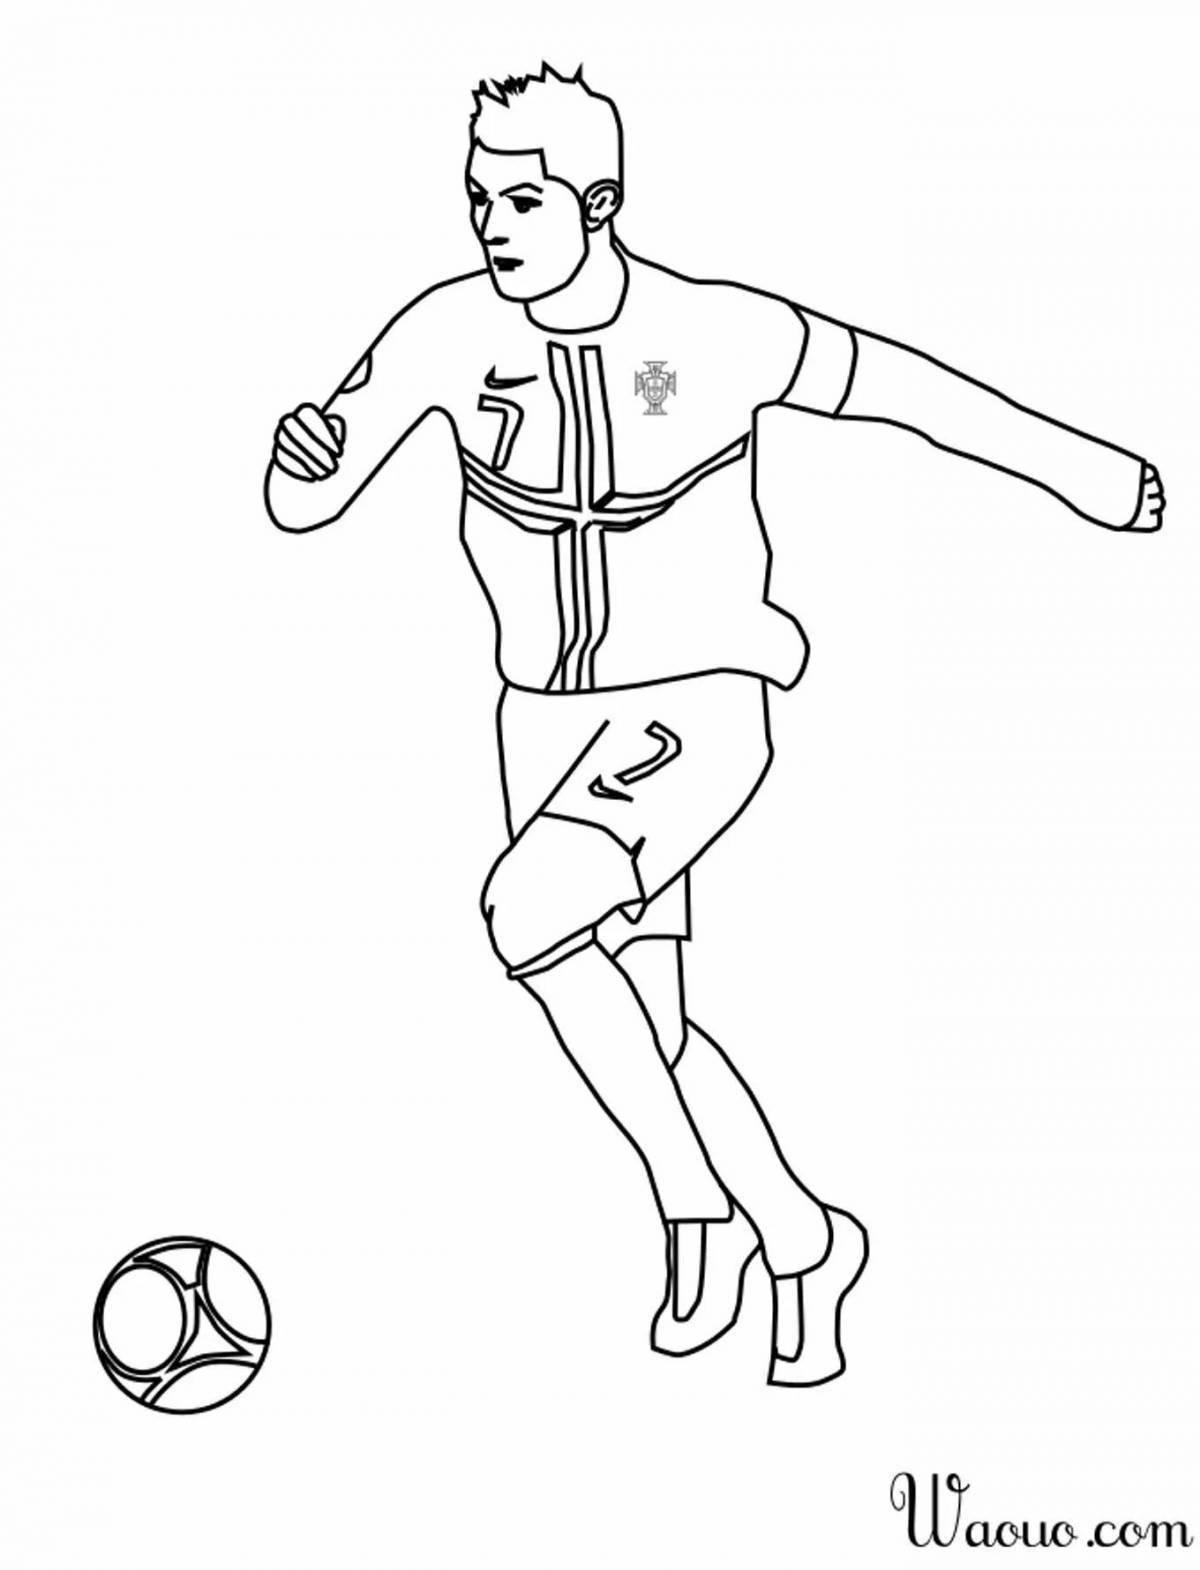 Violent football players coloring page